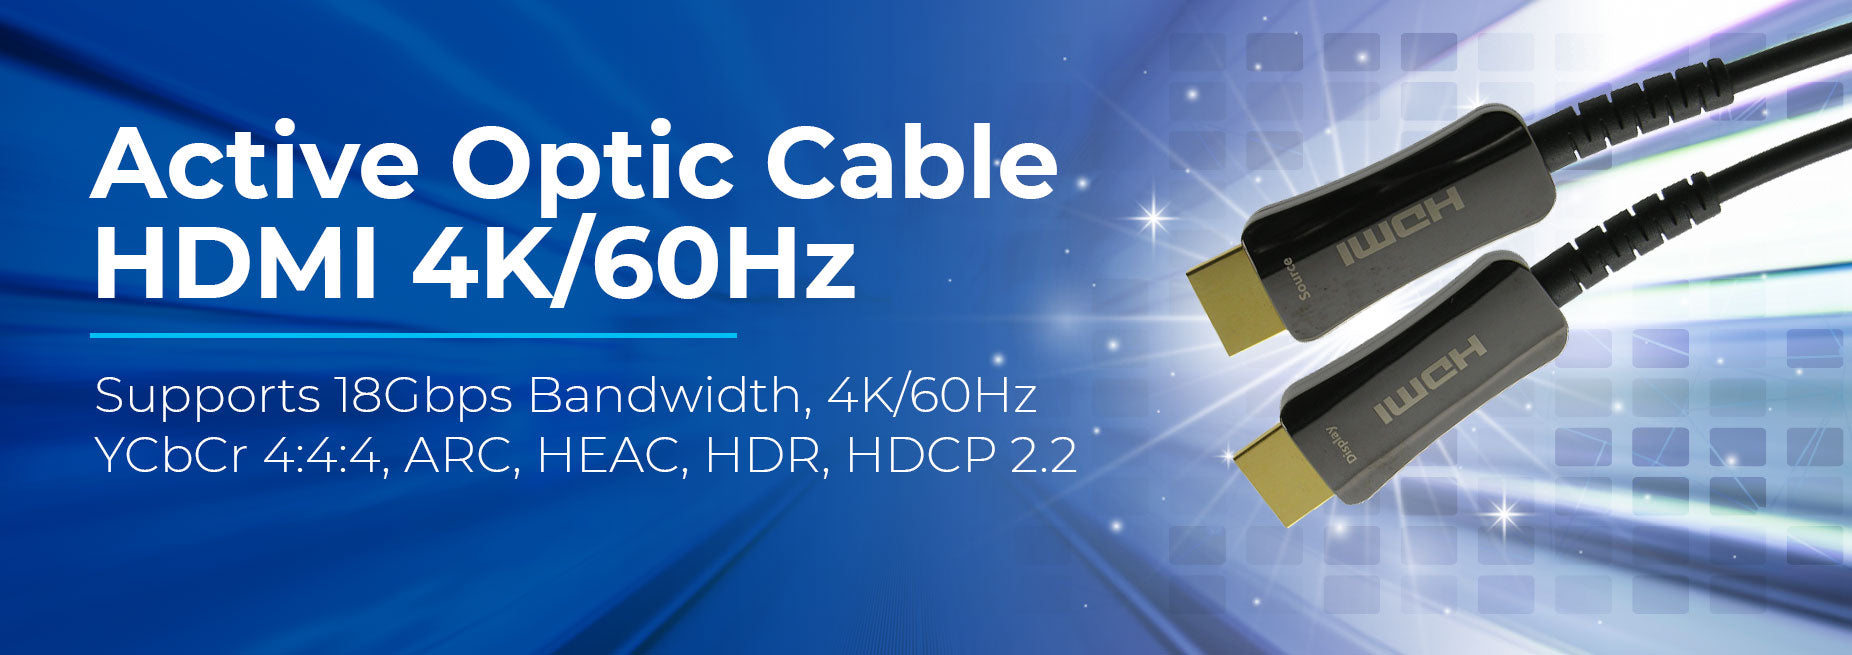 Active Optic Cable HDMI 4K - Primus Cable